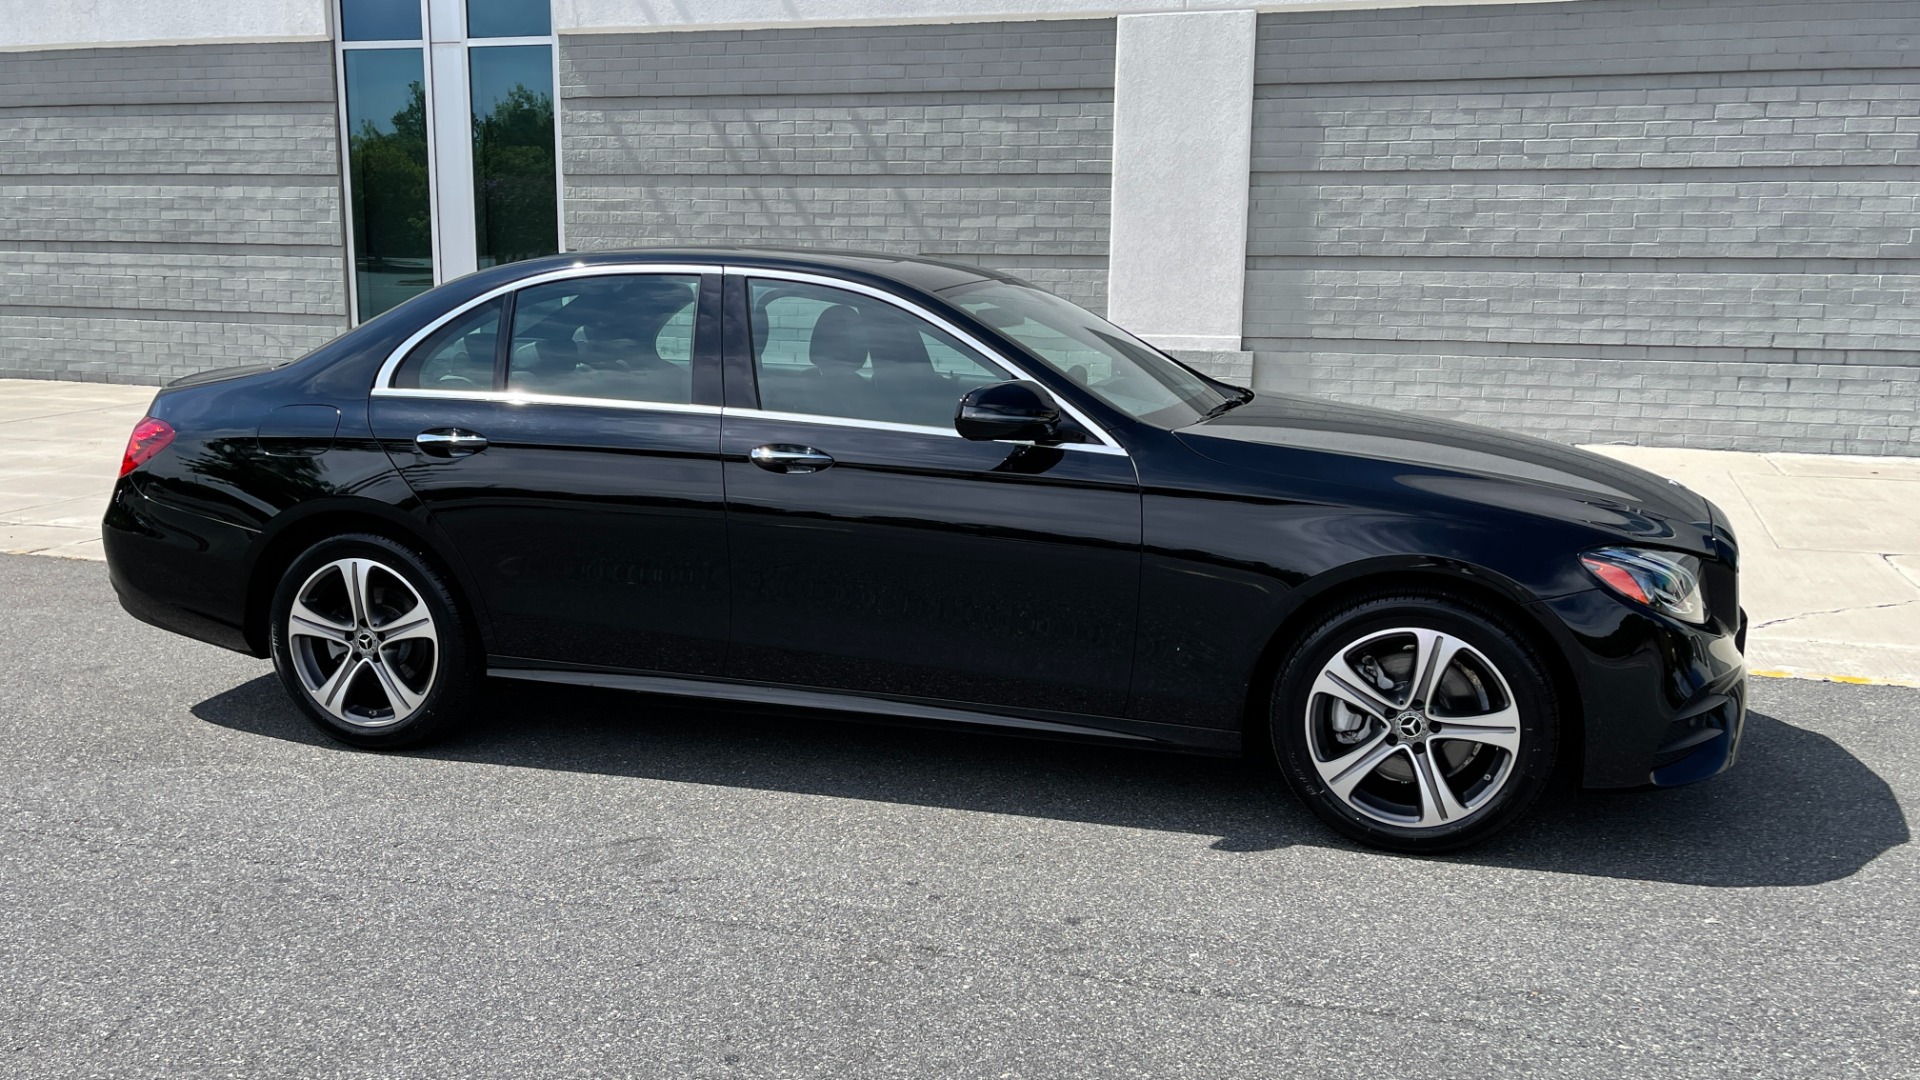 Used 2019 Mercedes-Benz E-Class E300 / 4MATIC / BURMESTER SOUND / PREMIUM PACKAGE / BLIND SPOT ASSIST for sale Sold at Formula Imports in Charlotte NC 28227 7